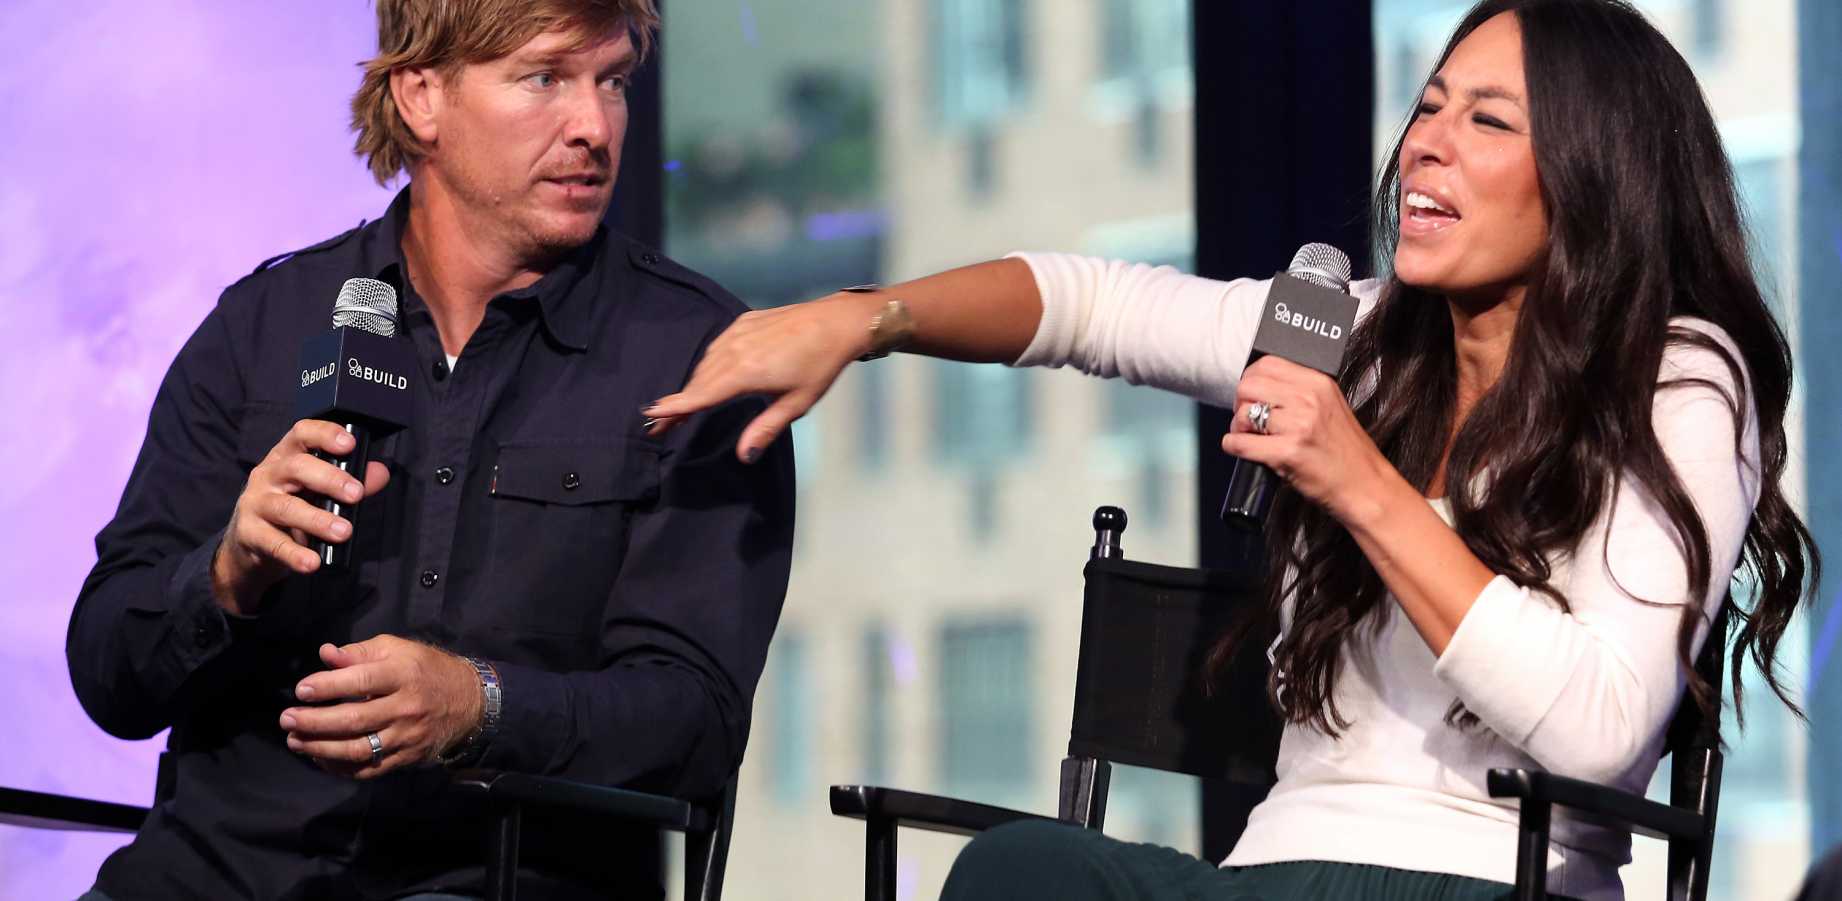 BuzzFeed attempts to destroy Christian HGTV stars Chip and Joanna Gaines over attending church